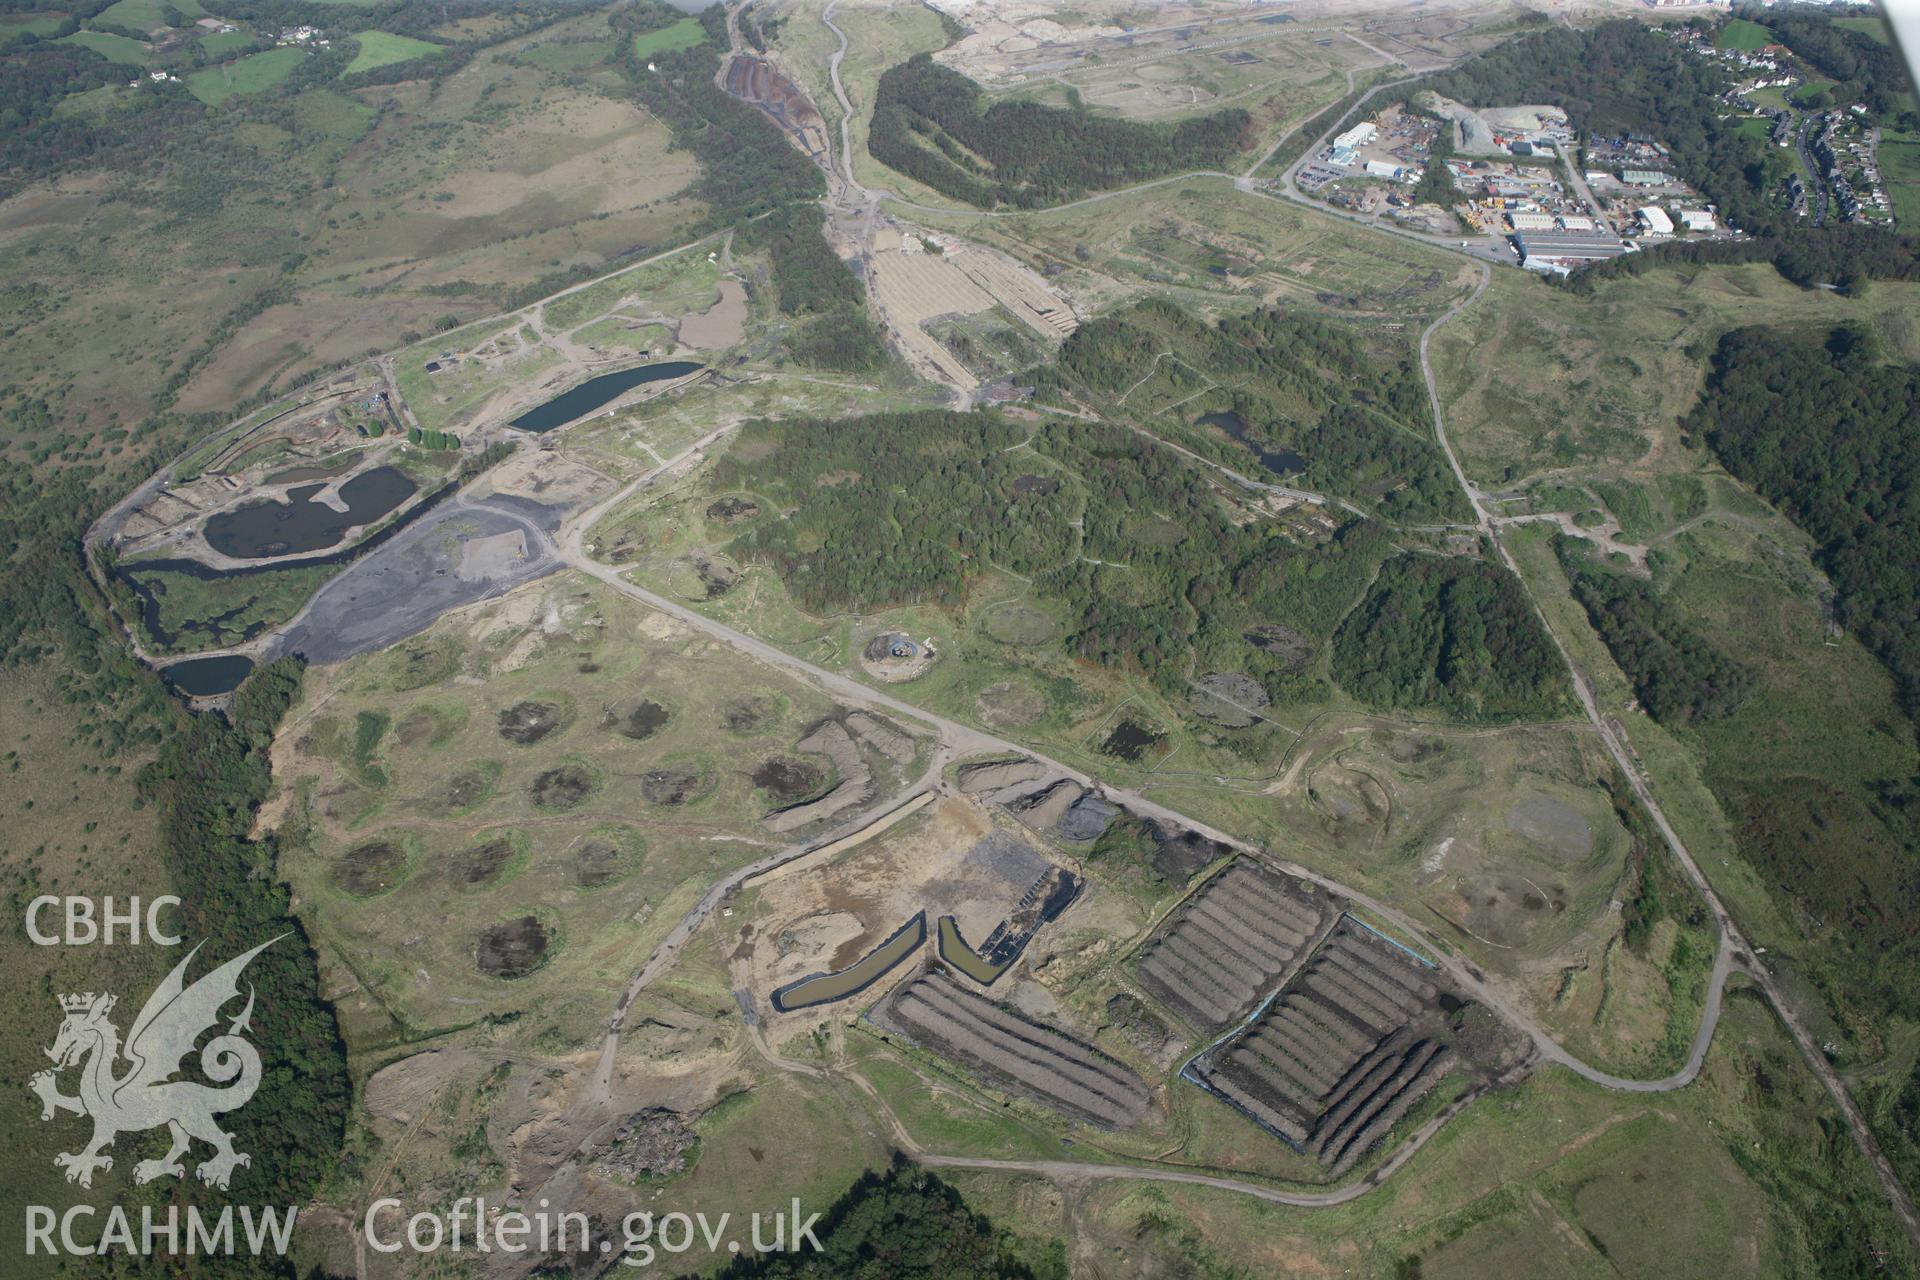 RCAHMW colour oblique photograph of south-eastern section of Llandarcy oil refinery from the south-east. Taken by Toby Driver and Oliver Davies on 28/09/2011.